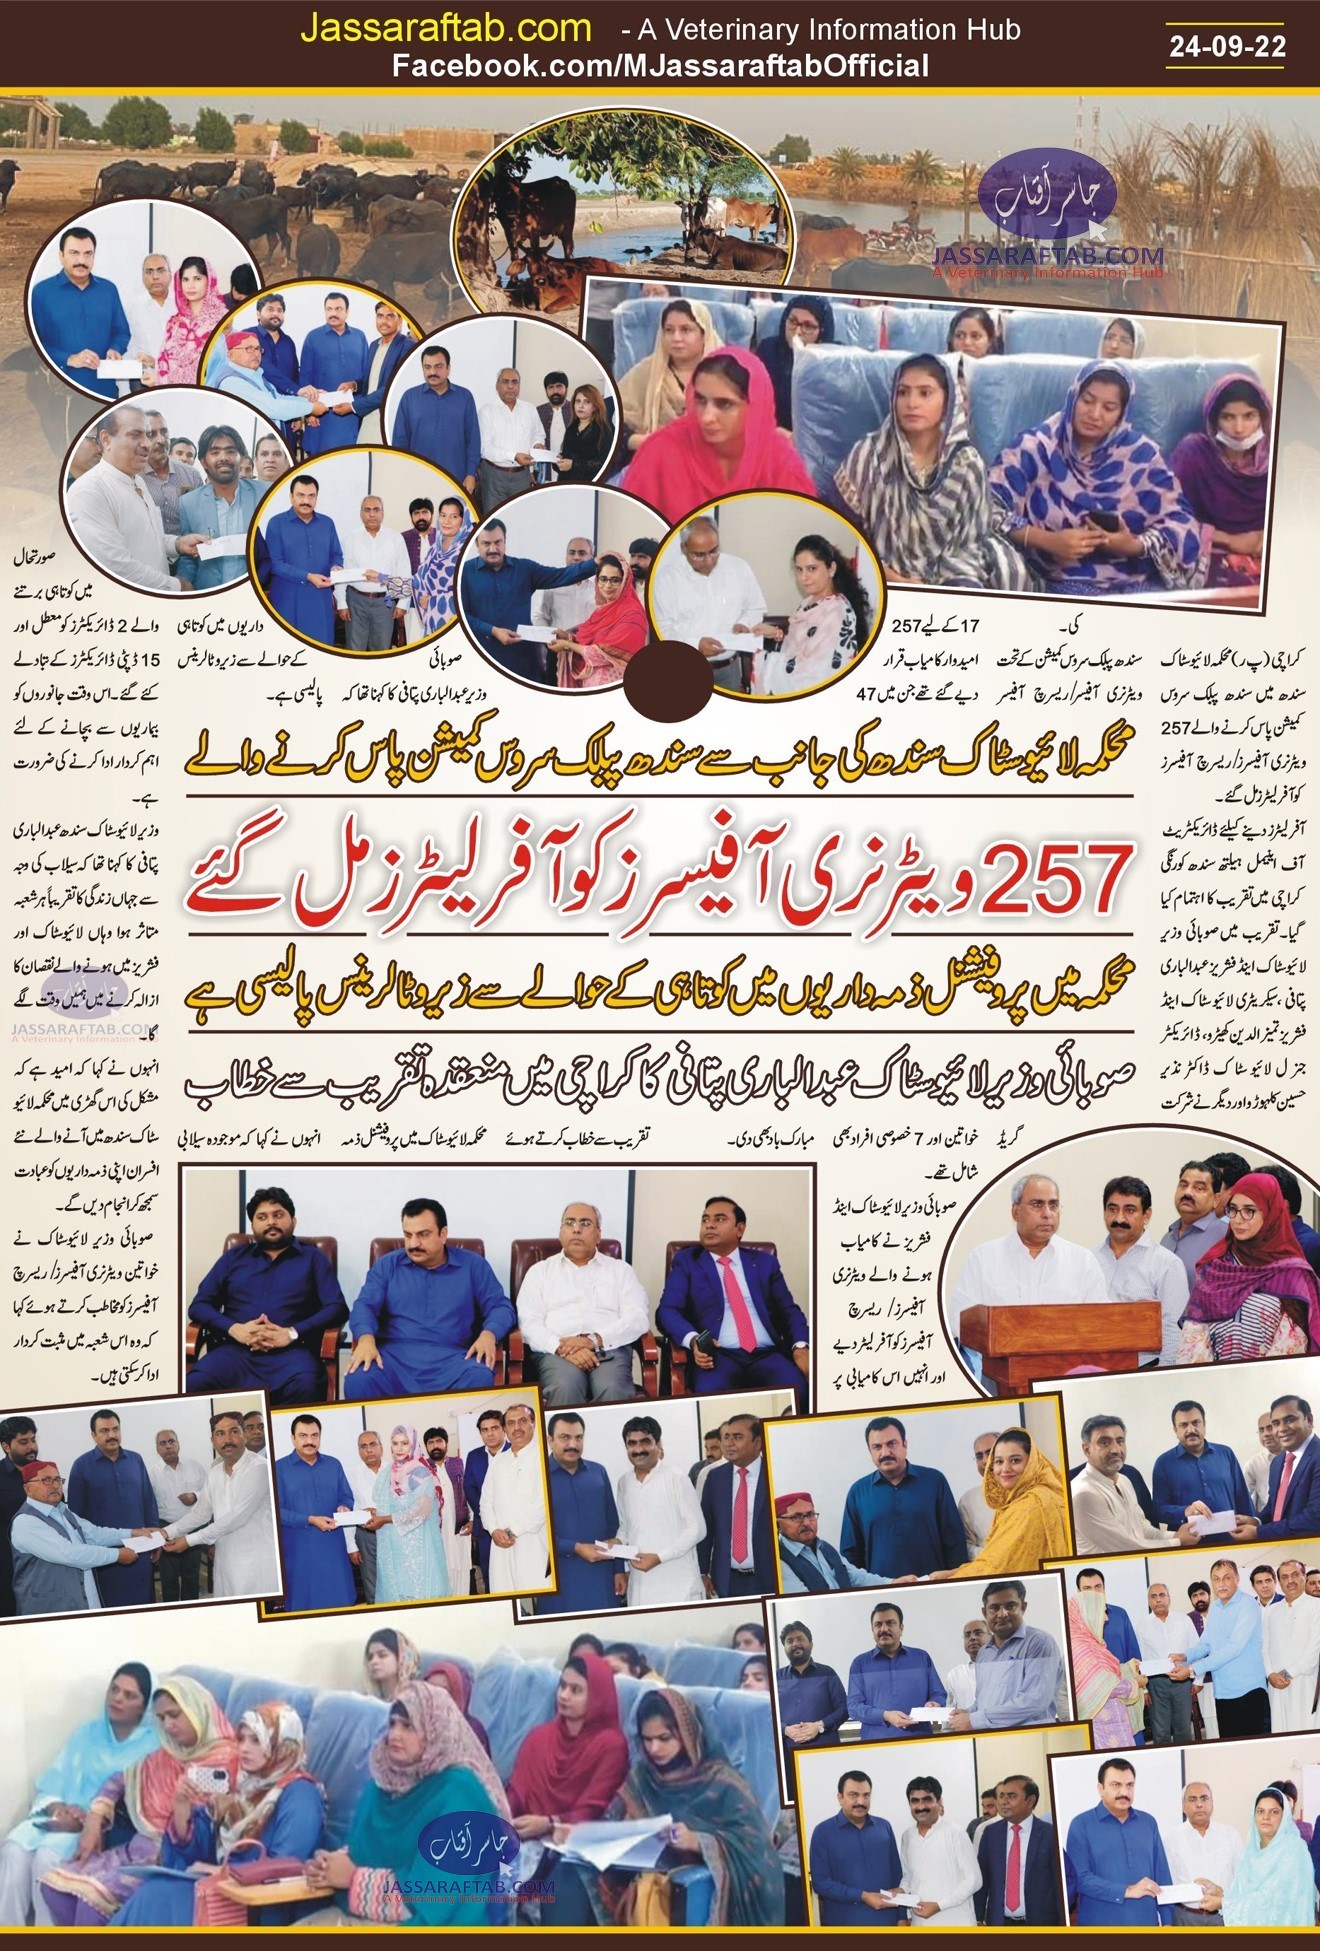 Ceremony held to hand Veterinary Officer Offer Letters at Livestock Sindh